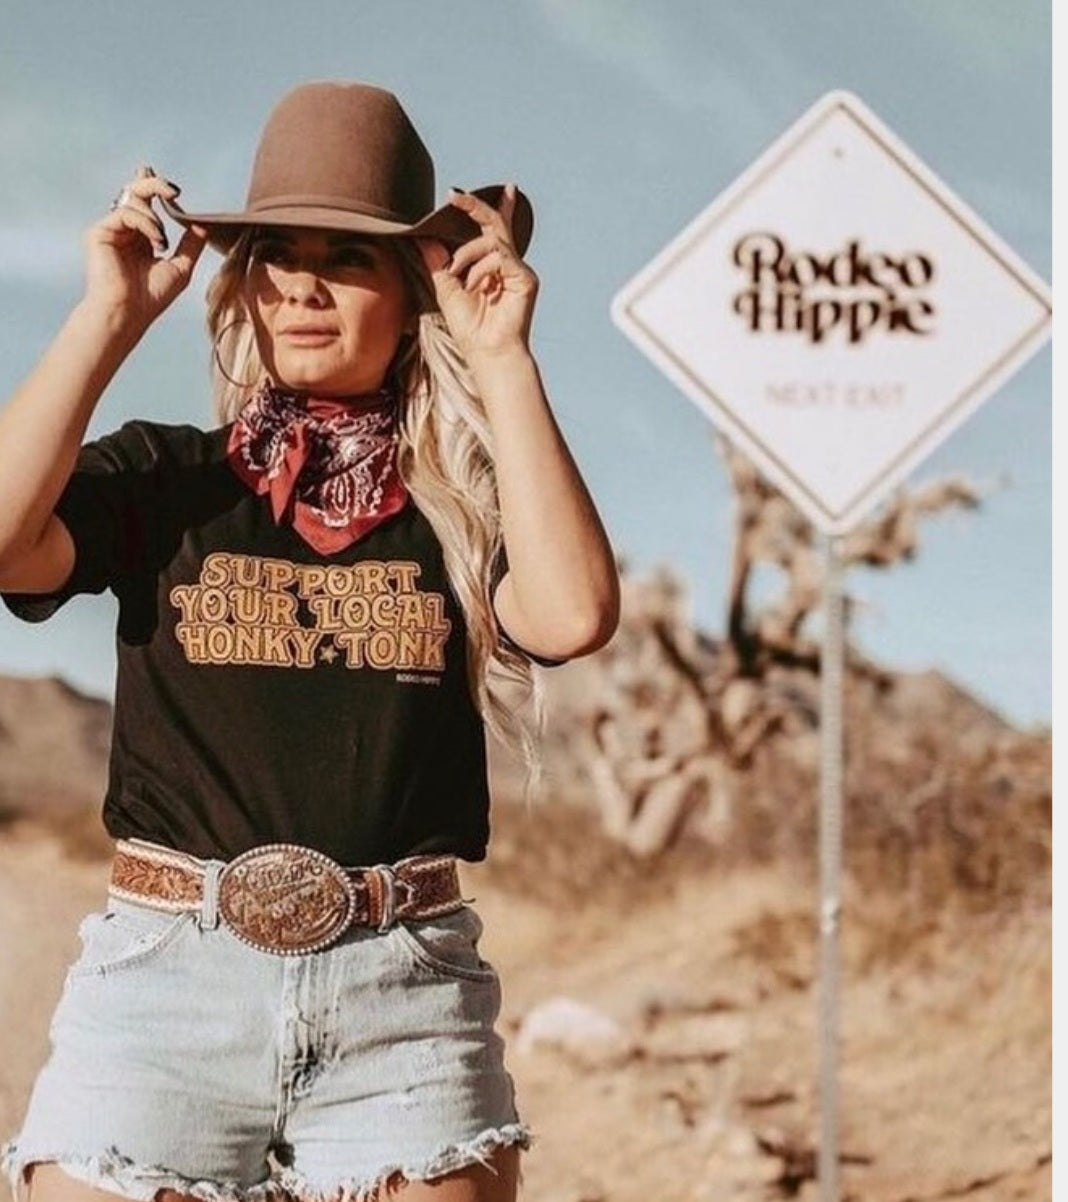 Support Your Local Honky Tonk PRE ORDER ! - cowboy, cowboys, cowgirl, graphic, hippies, honky, rodeo, shirt, t, tee, tonk, western -  - Baha Ranch Western Wear